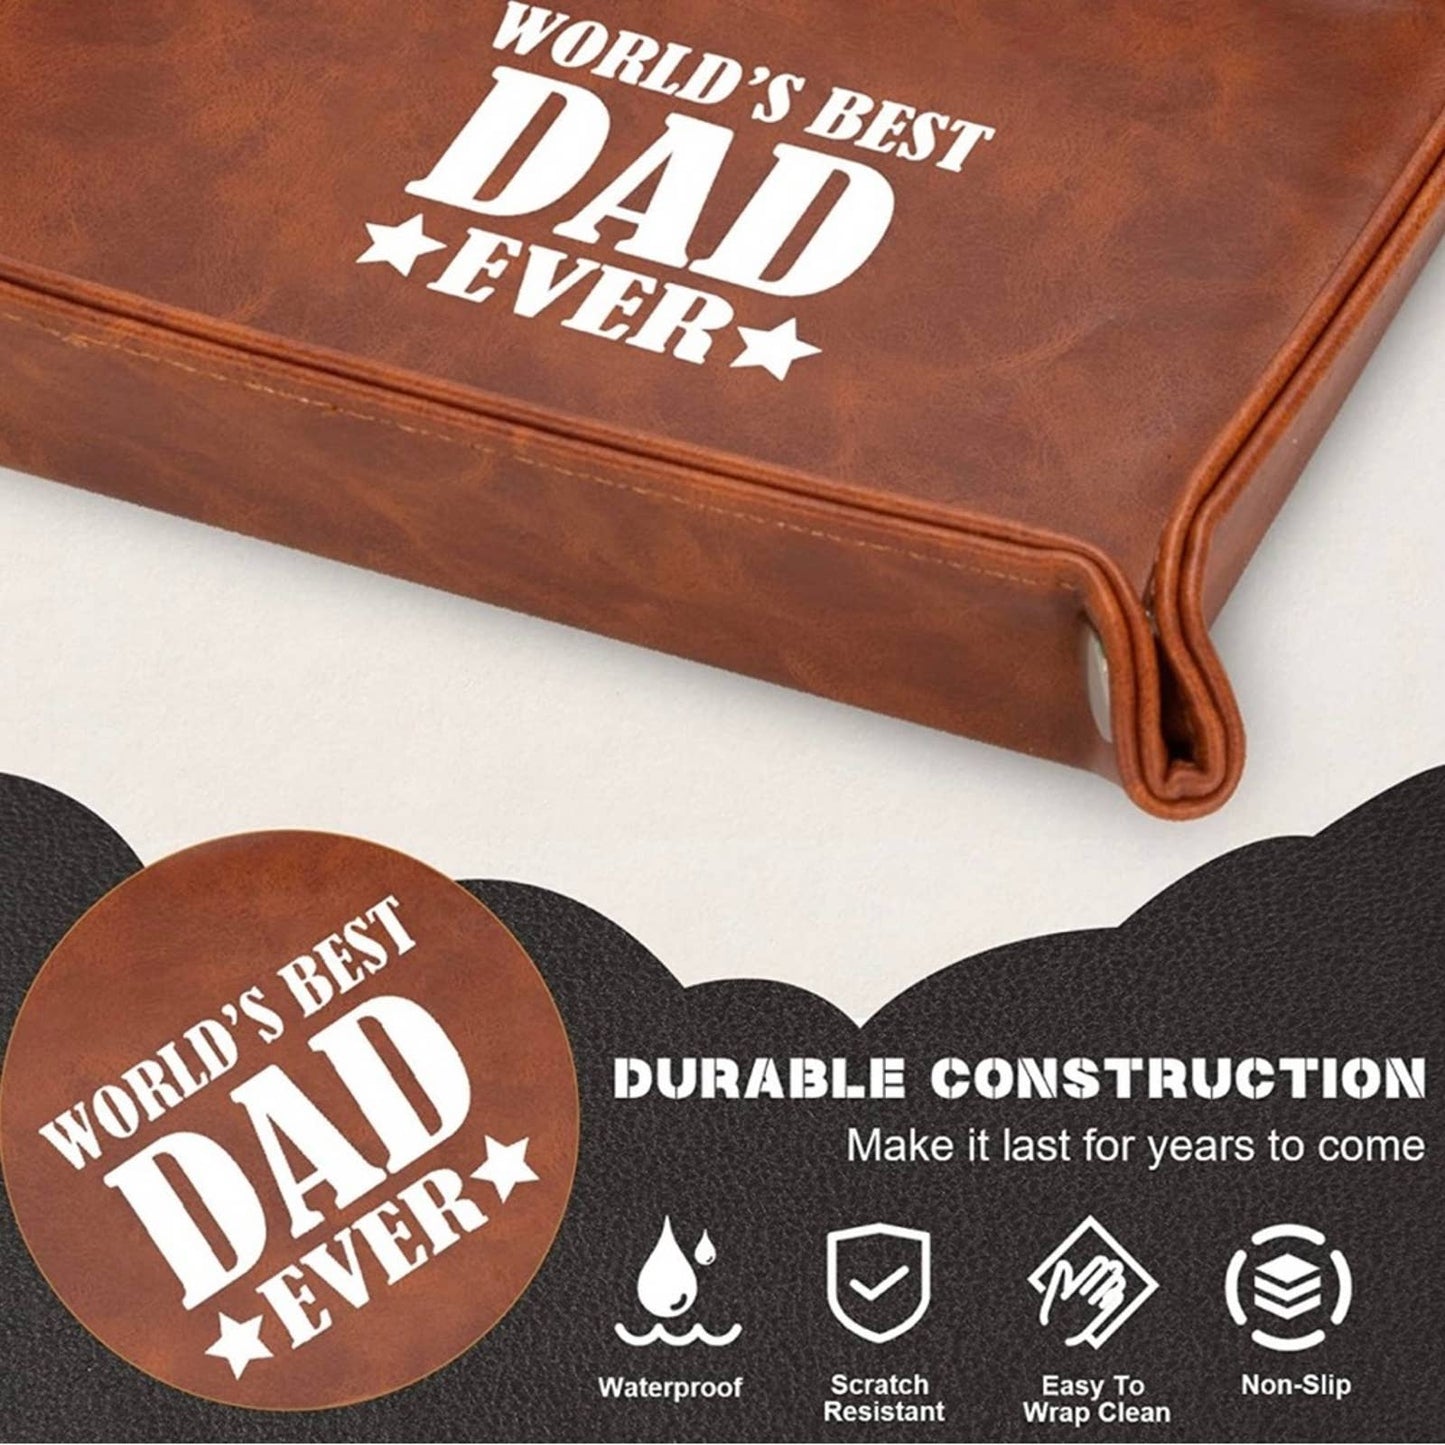 Gifts for Dad, World's Best Dad Ever Leather Key Valet Tray, Brown